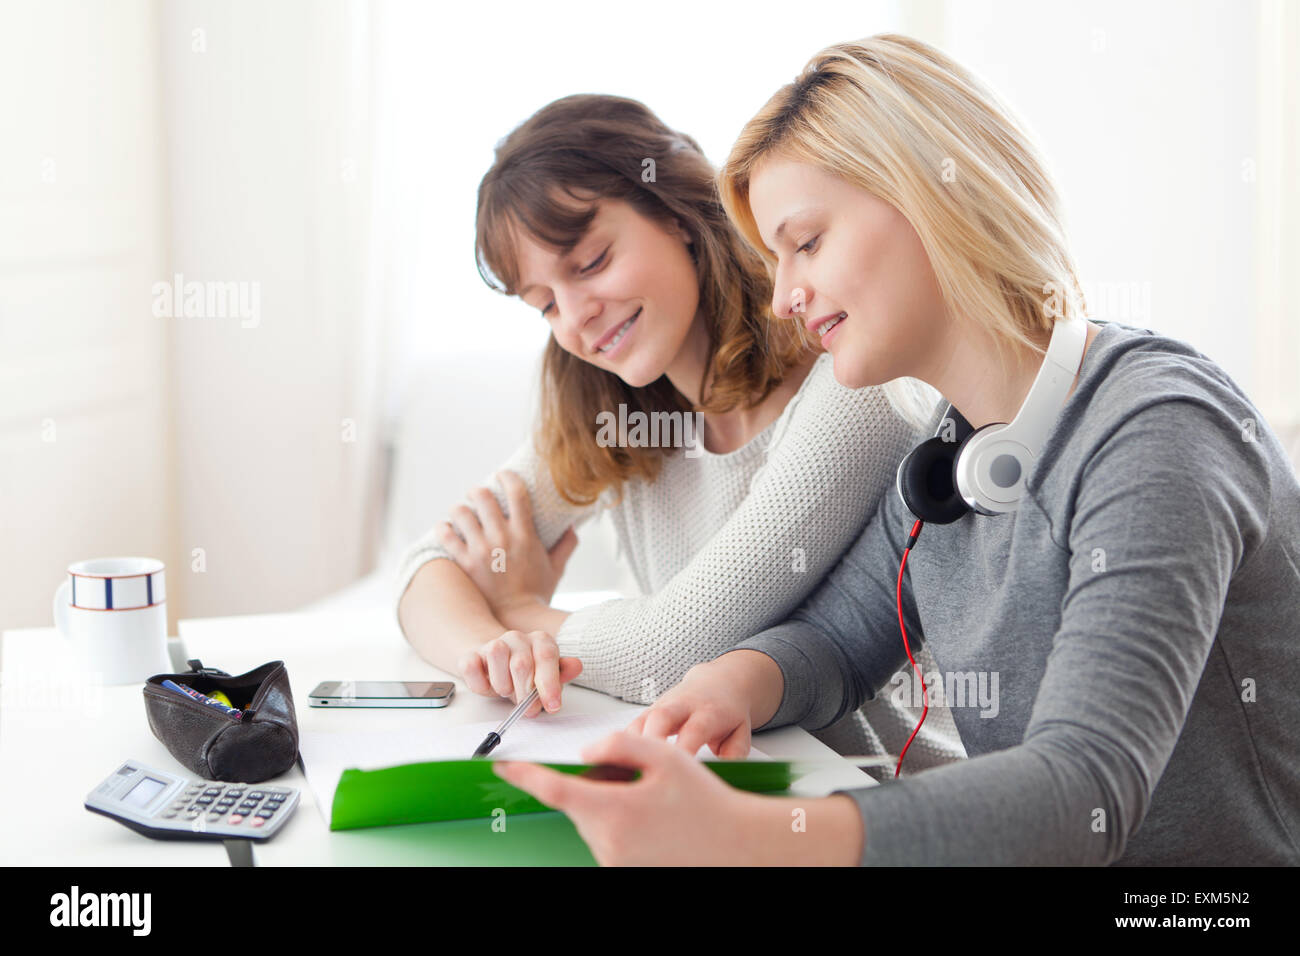 View of a Young teacher assist a student during her homework Stock Photo